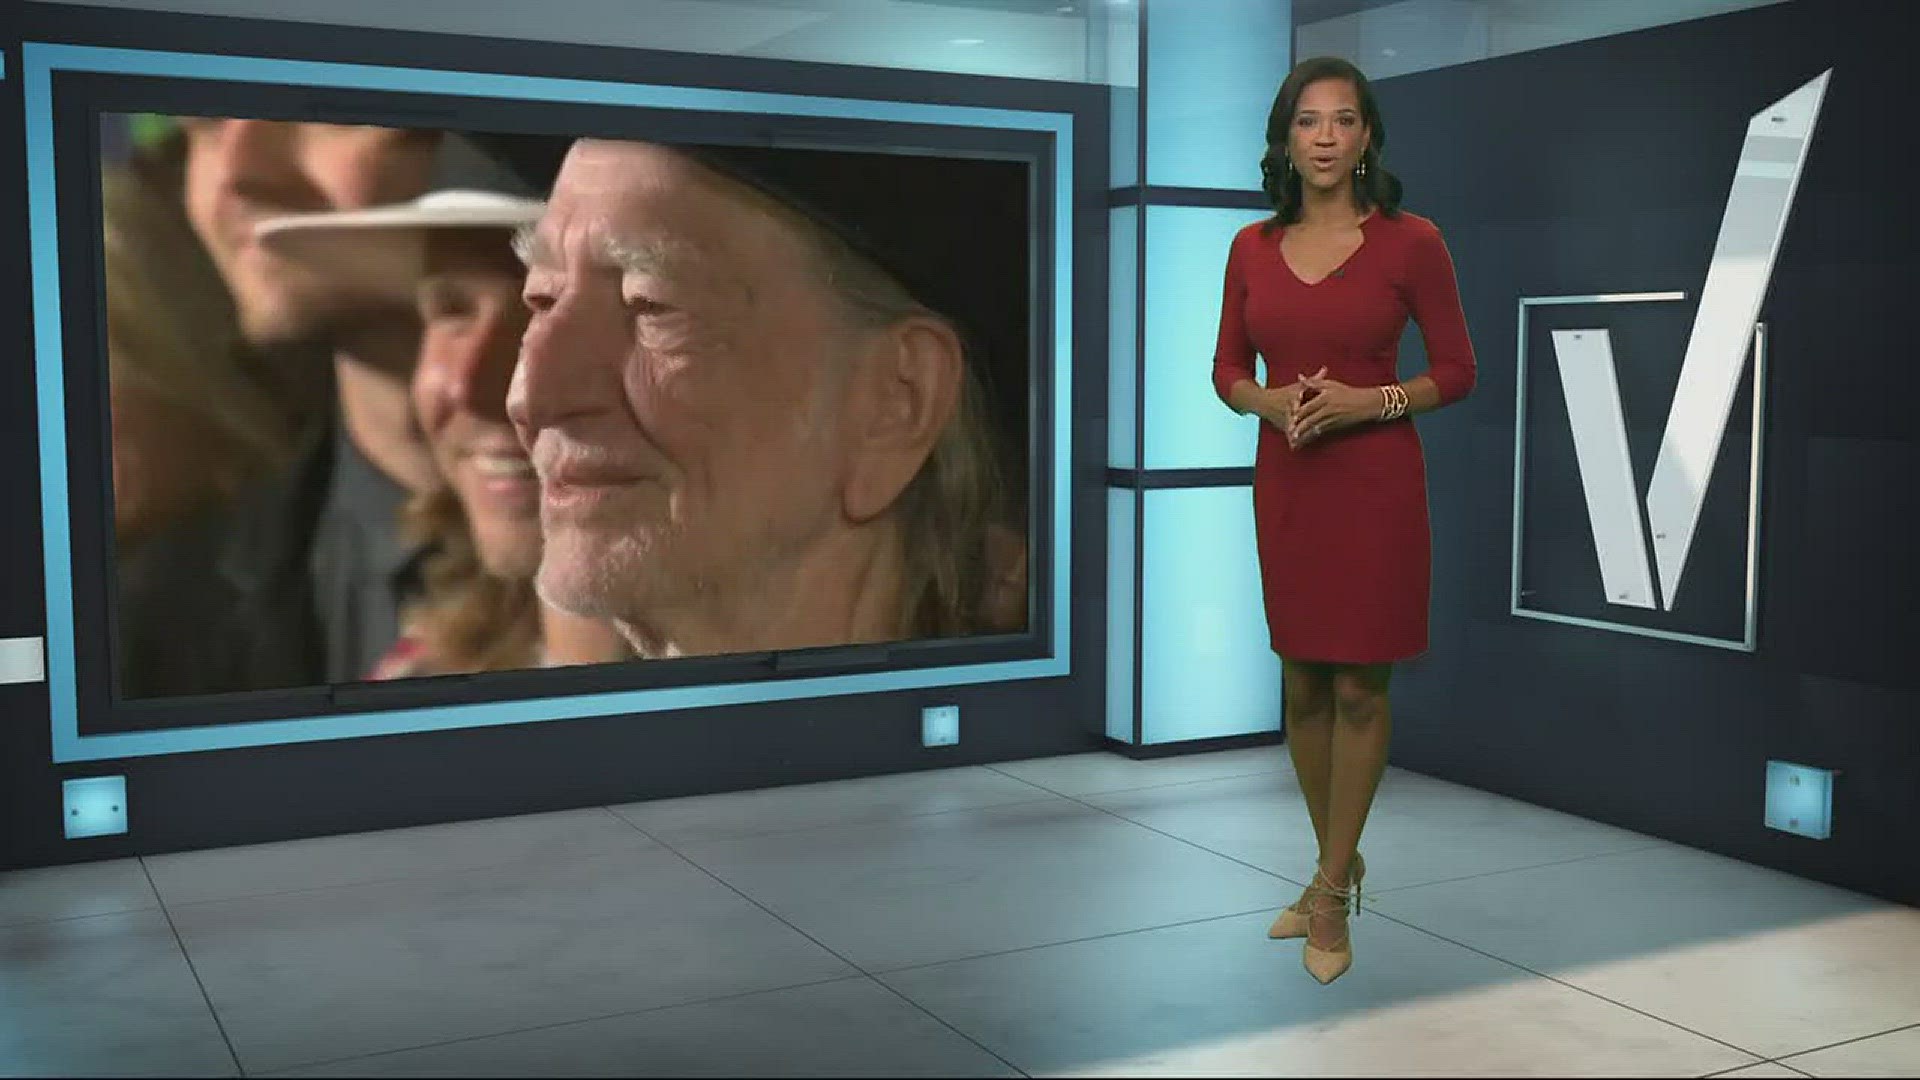 Willie Nelson is alive and well despite another round of internet rumors and irresponsible radio station tweets Thursday.